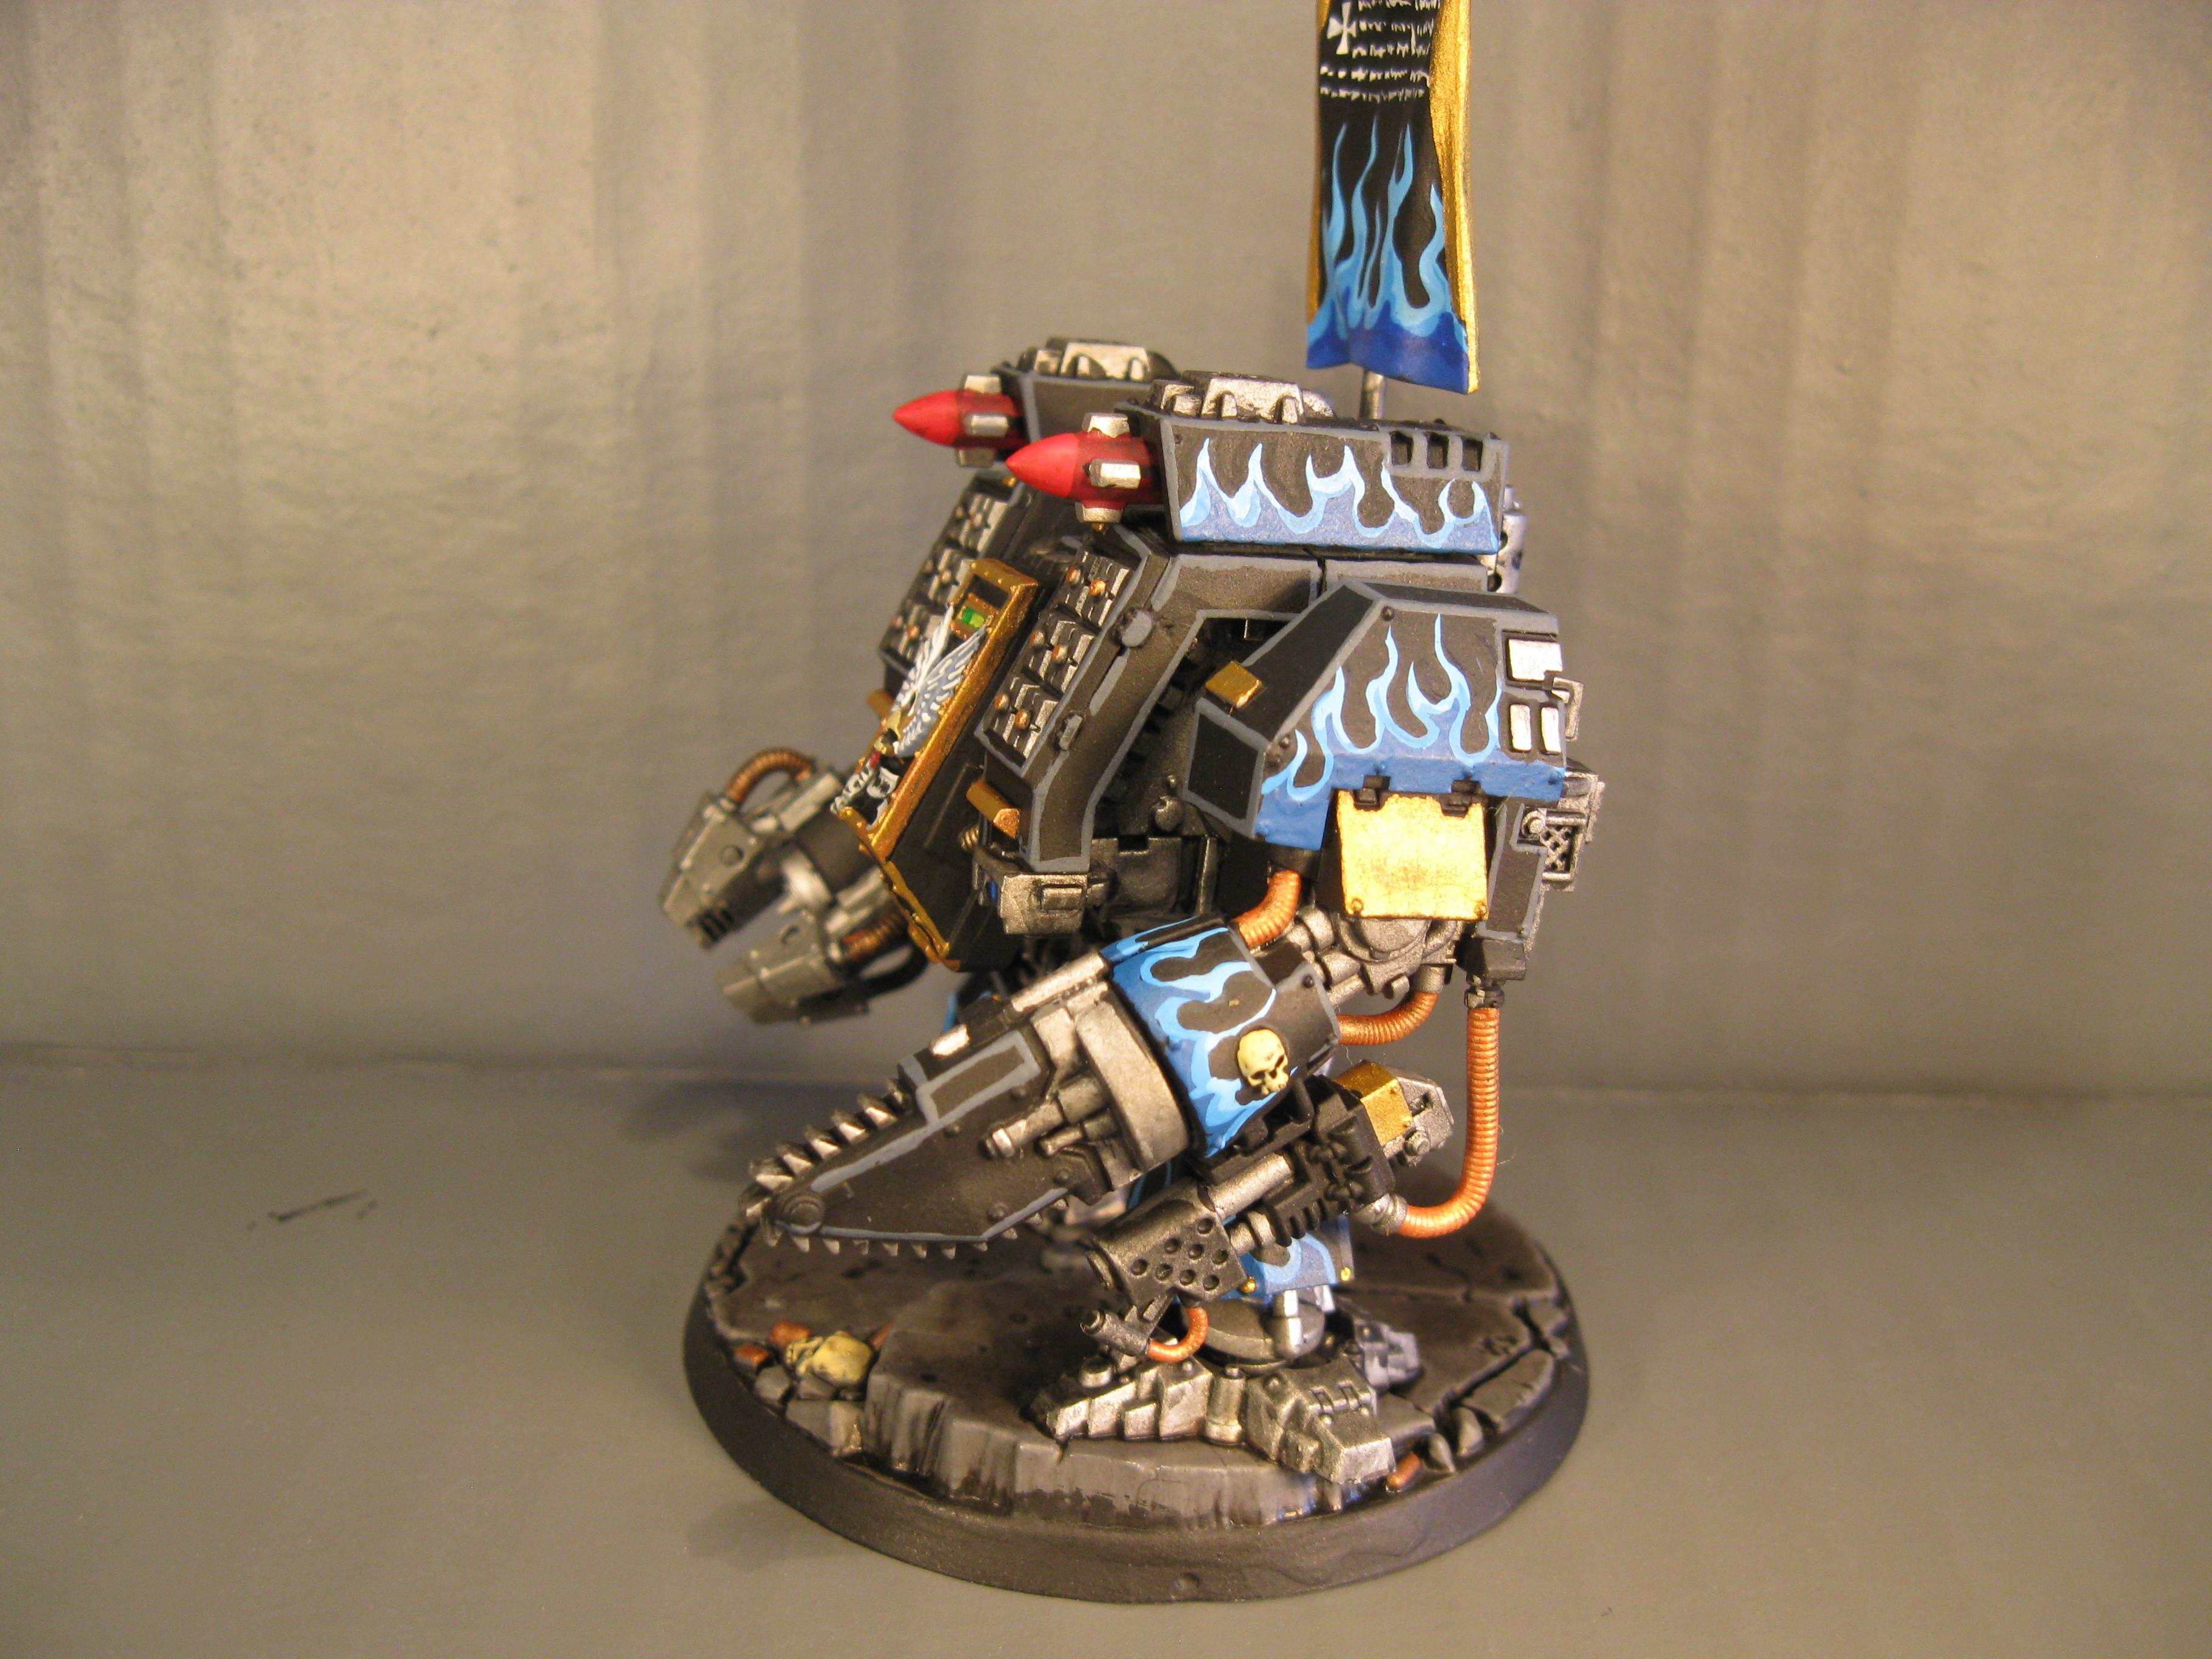 Dreadnought, Dred, Flame Job, Flames, Freehand, Space Marines, Warhammer 40,000